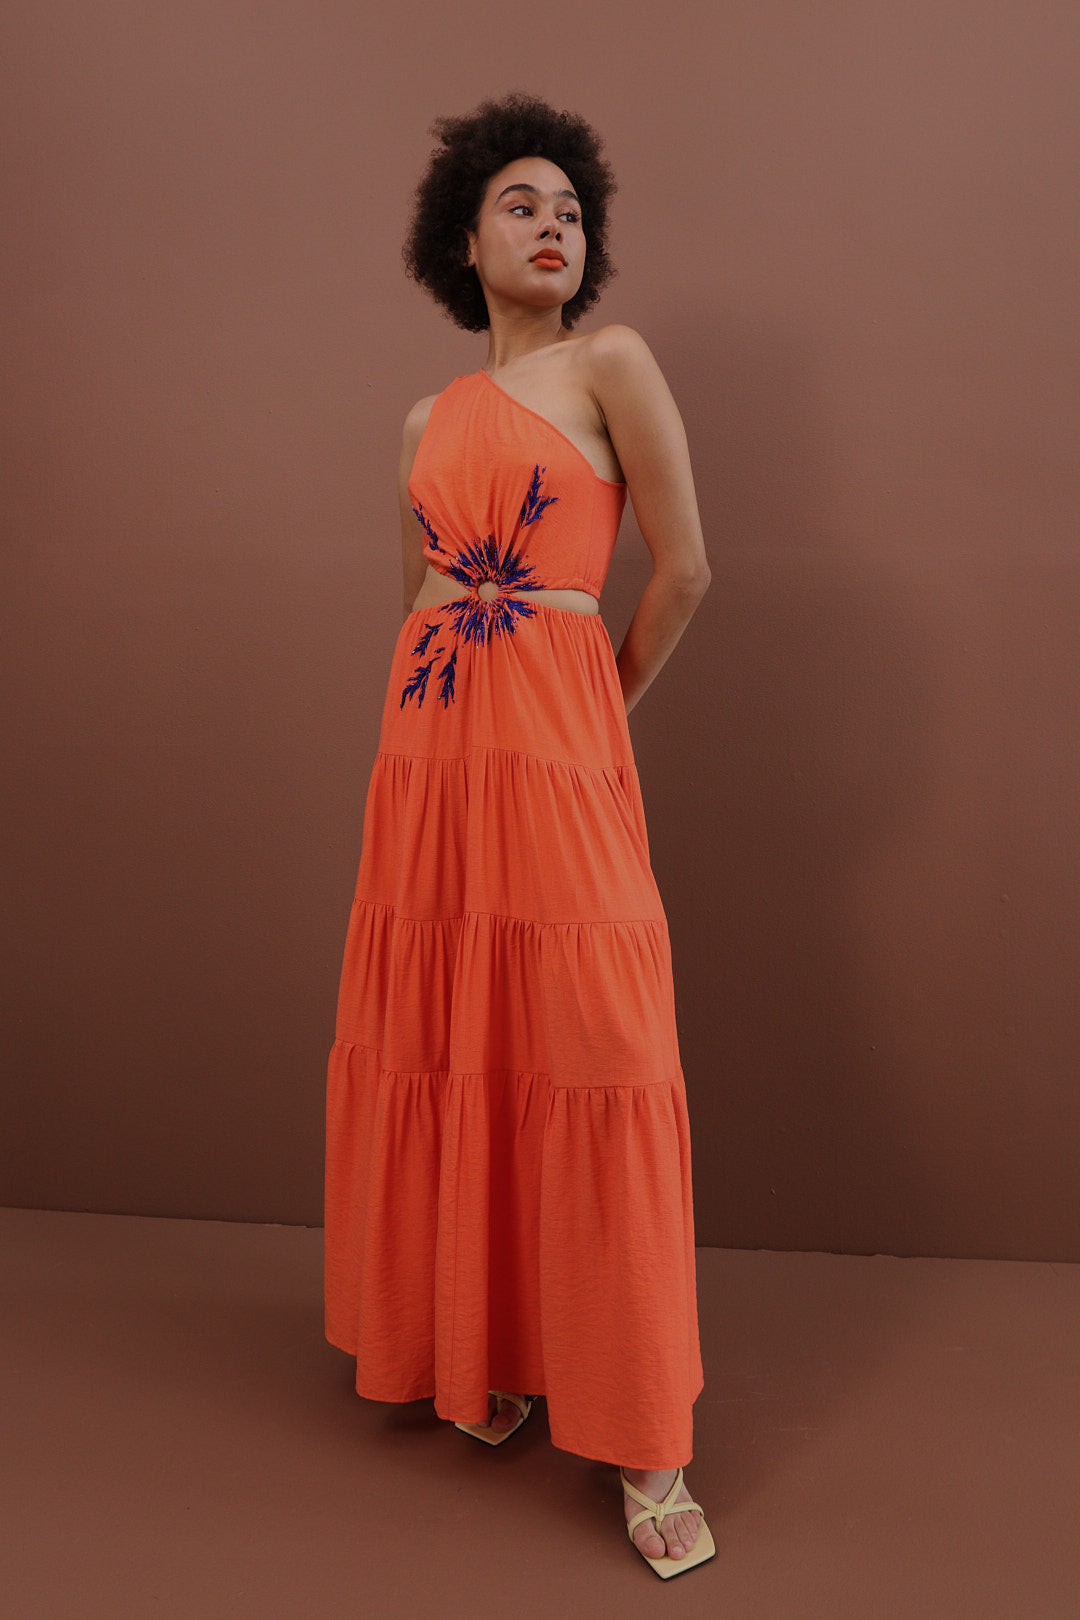 Orange dress with hand-made embroidery.